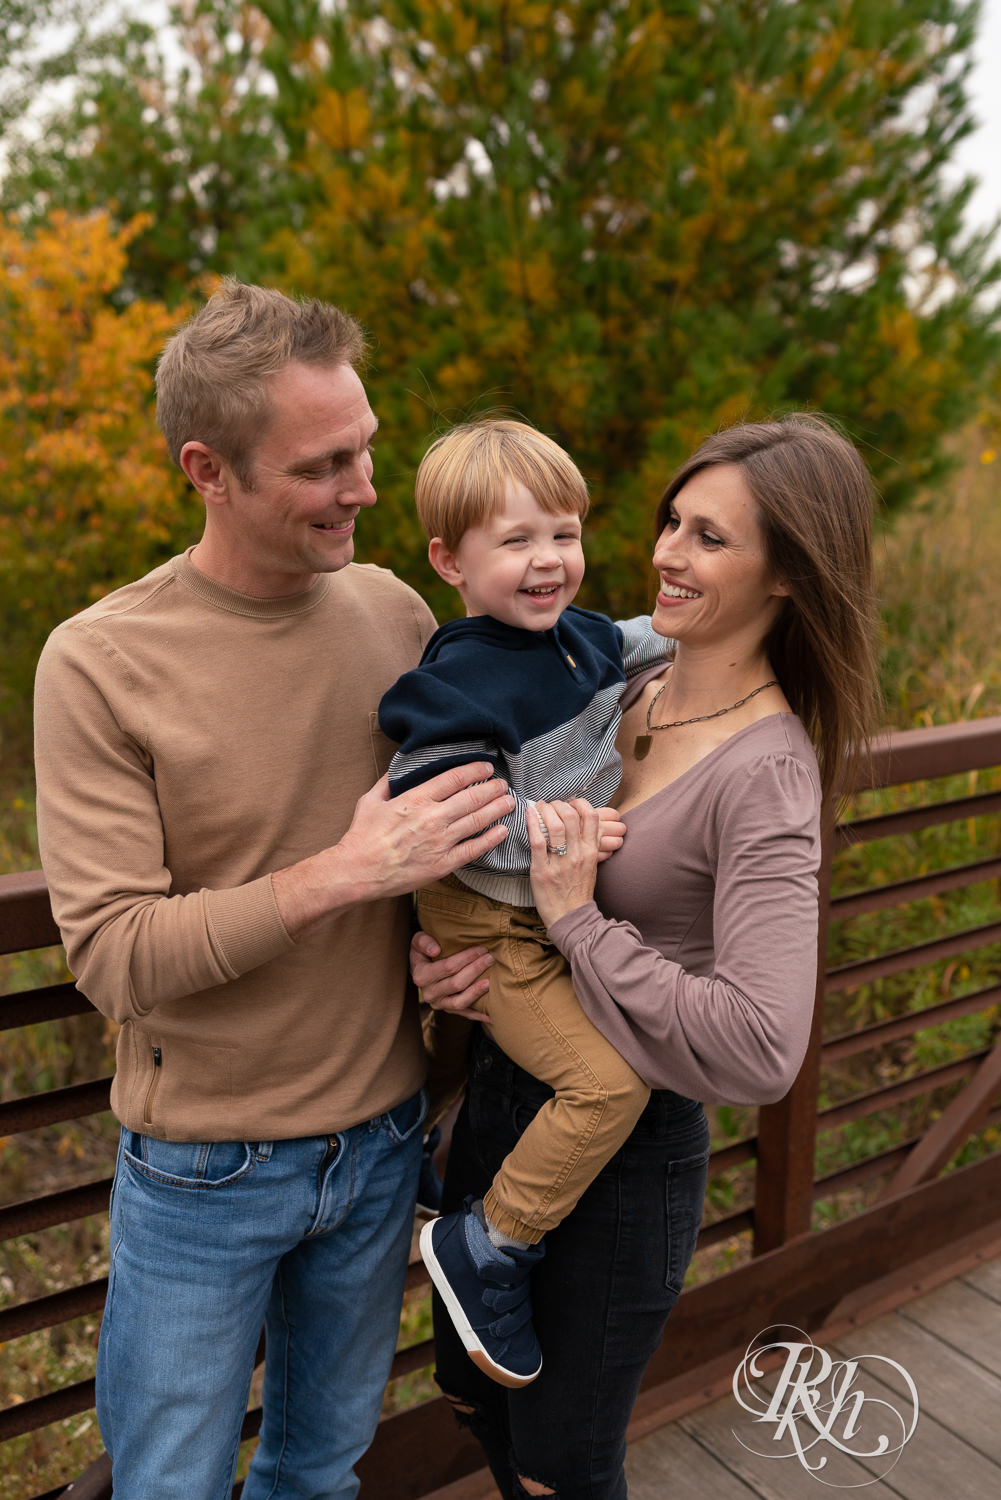 Minnesota outdoor family photography of little boy laughing with parents at Whitetail Woods in Farmington, Minnesota.